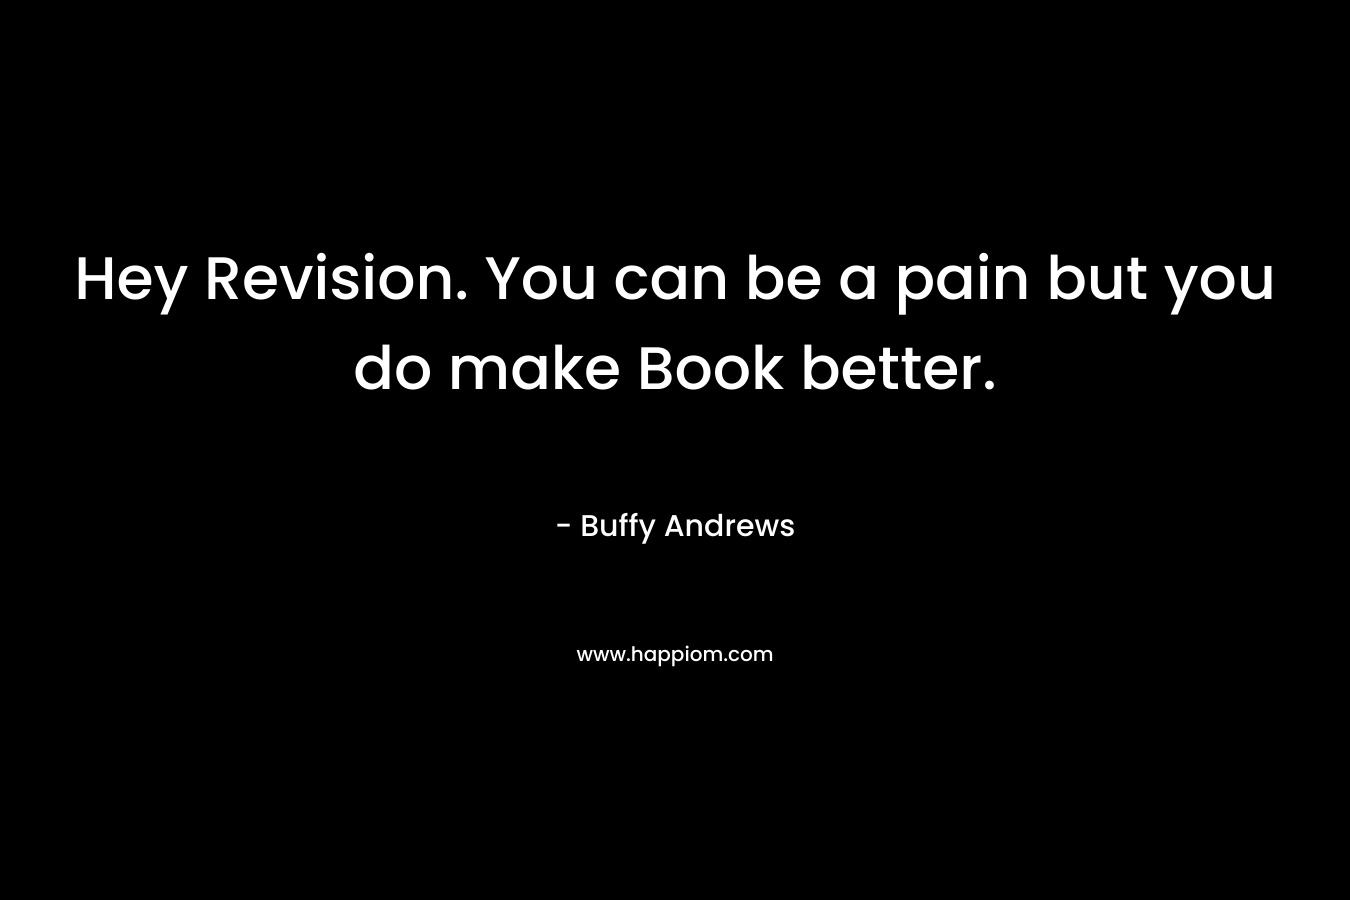 Hey Revision. You can be a pain but you do make Book better. – Buffy Andrews